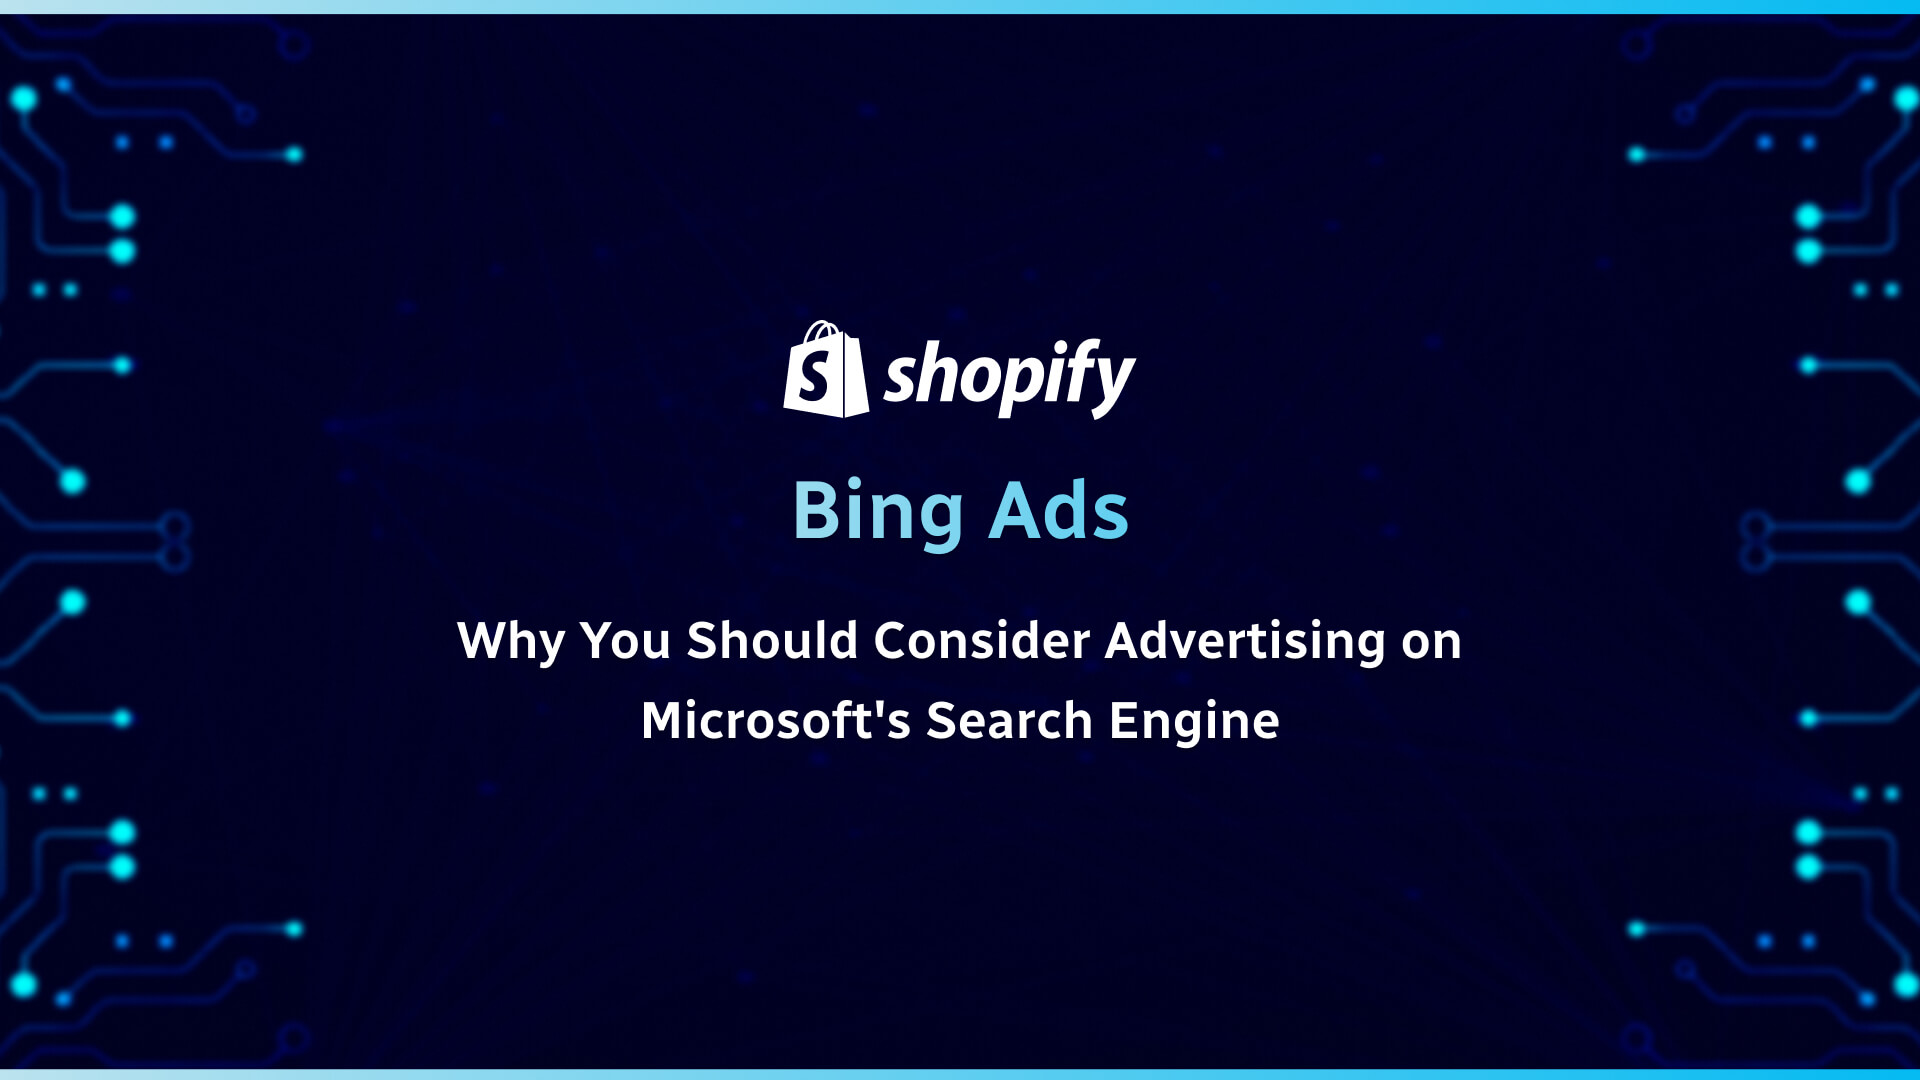 Bing Ads_ Why You Should Consider Advertising on Microsoft's Search Engine